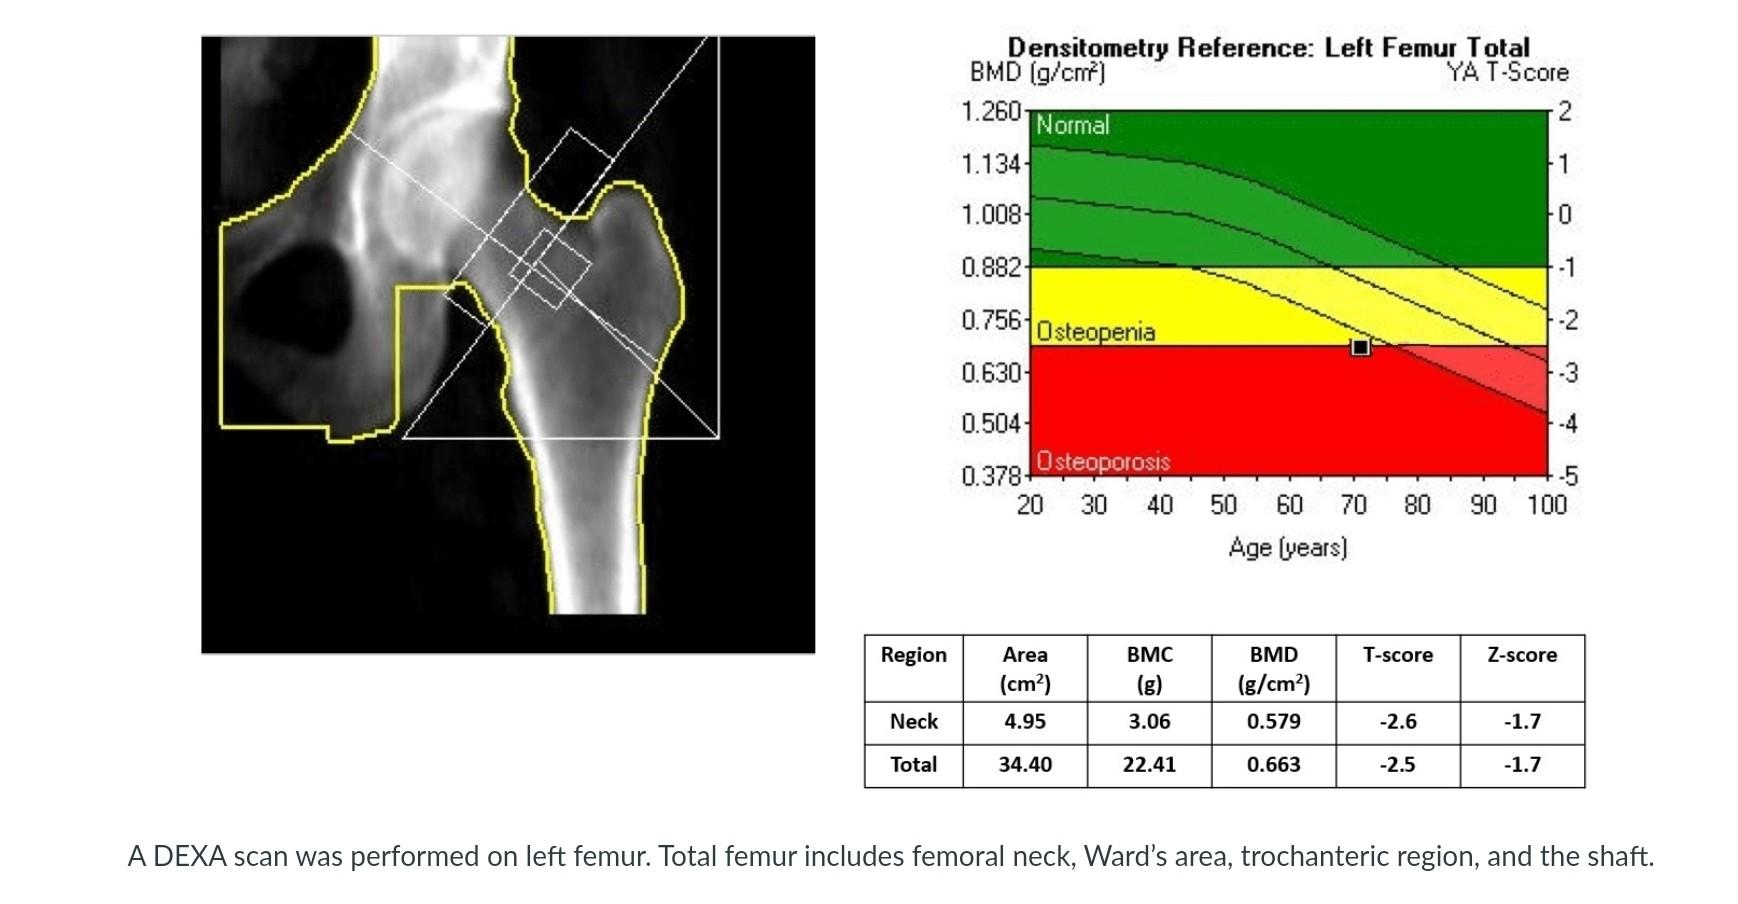 A DEXA scan was performed on left femur. Total femur includes femoral neck, Wards area, trochanteric region, and the shaft.